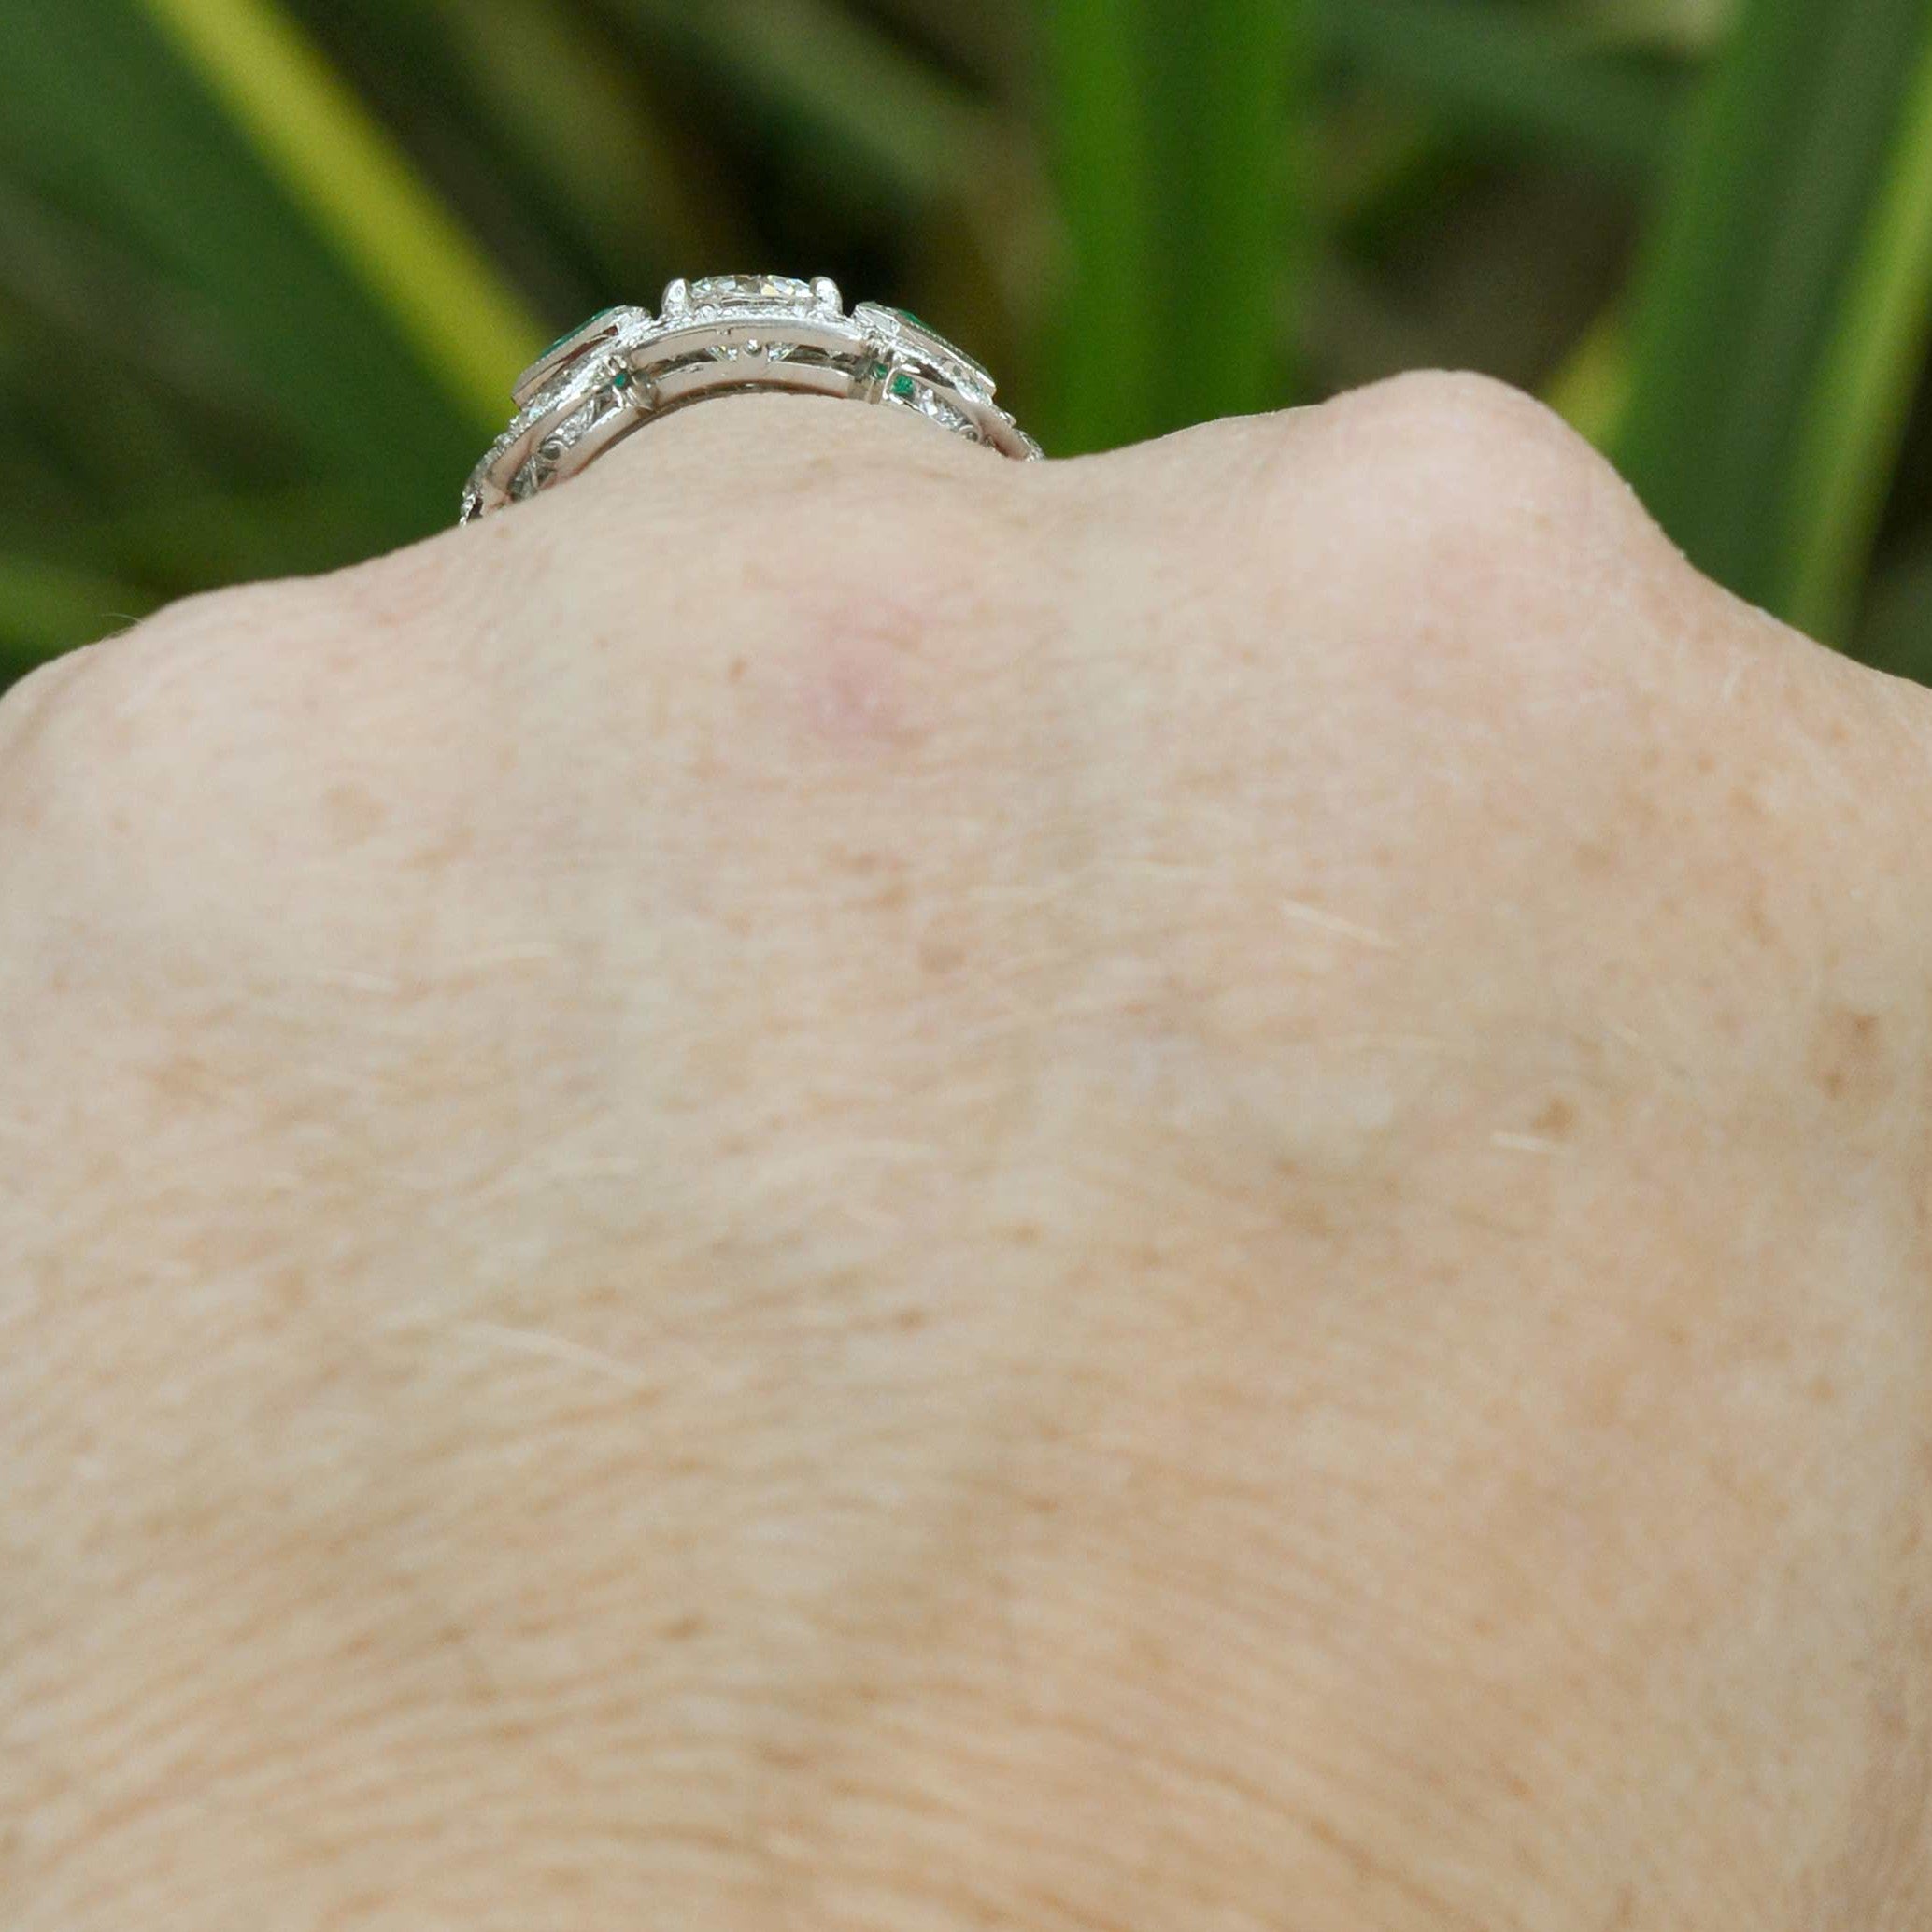 This diamond ring has low rise off the hand.